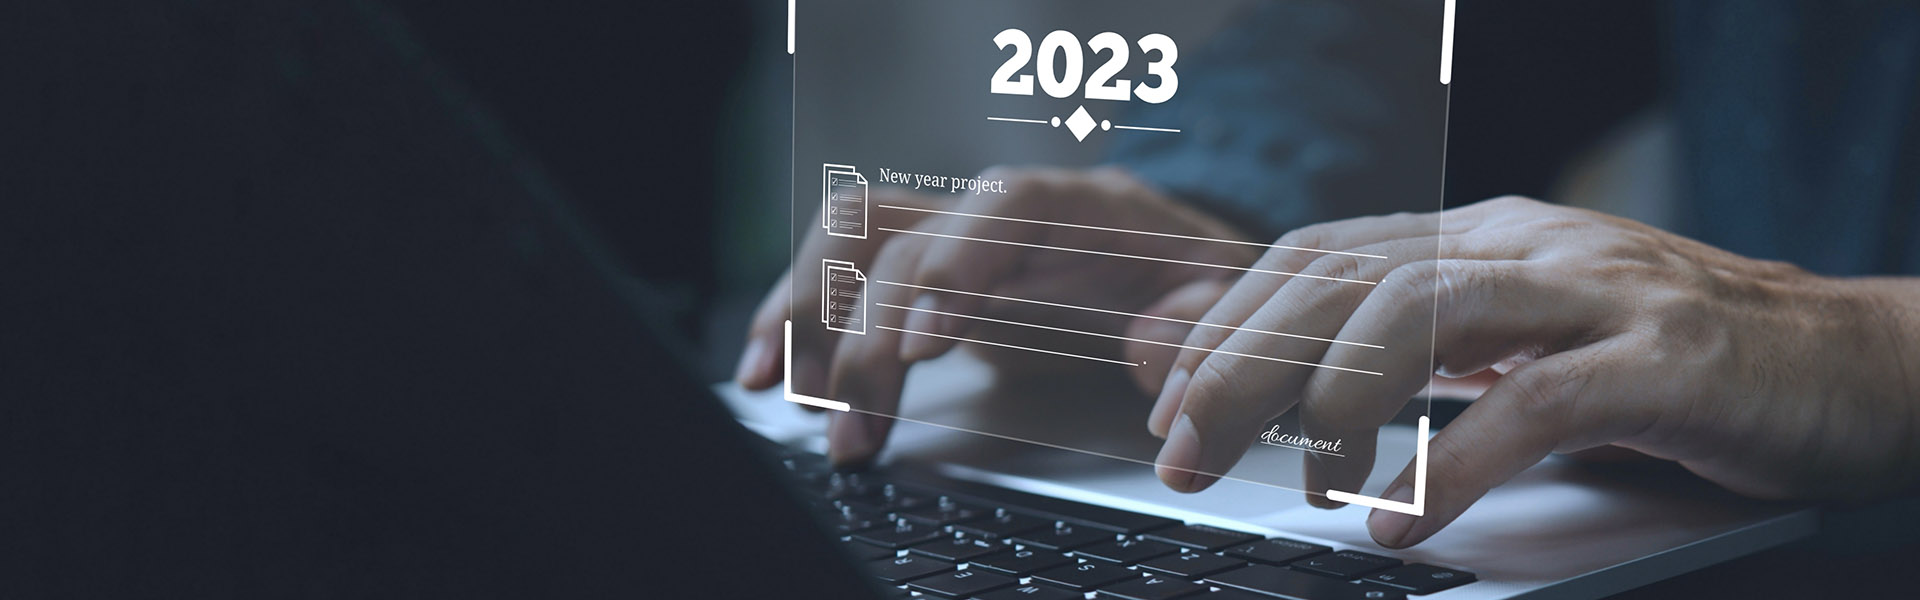 tech-trends-2023-stage